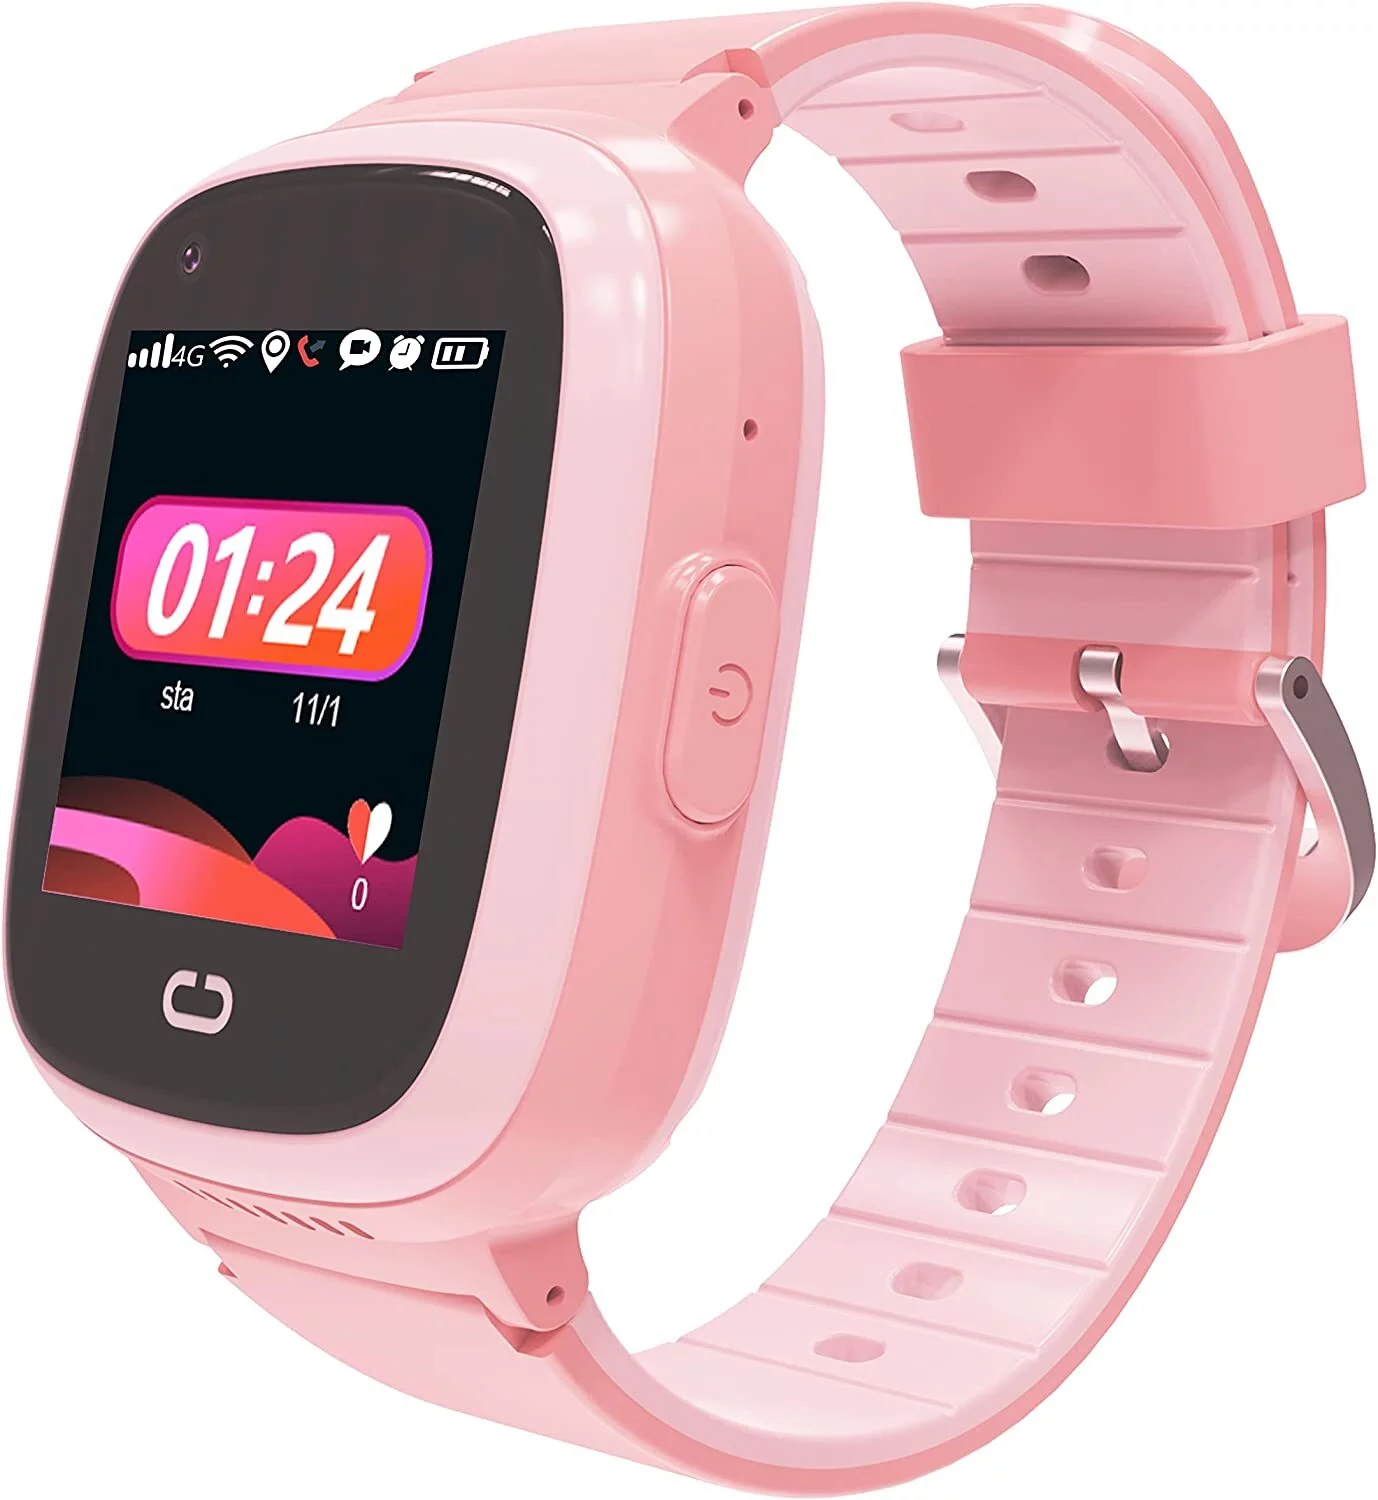 PTHTECHUS Kids Smartwatch with GPS 4G HD Touchscreen Watch with Phone GPS Tracker Real-Time Location SOS Video Call Voice Chat Camera Waterproof Android and iOS for Boys Girls Gift Pink